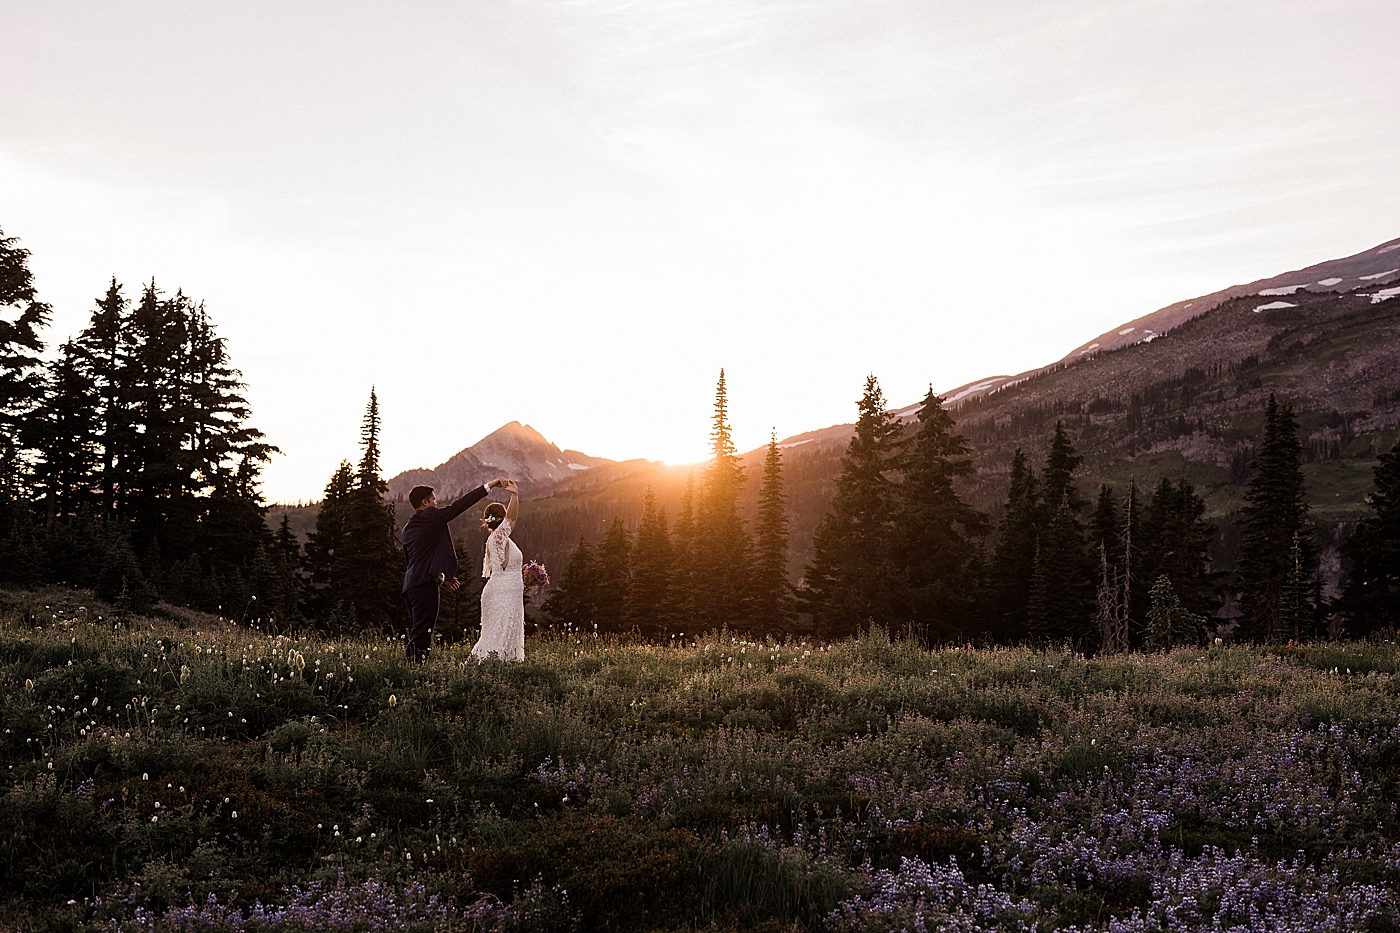 Bride and groom dancing in the Mt Rainier as the sun sets behind them. Photo by Megan Montalvo Photography.